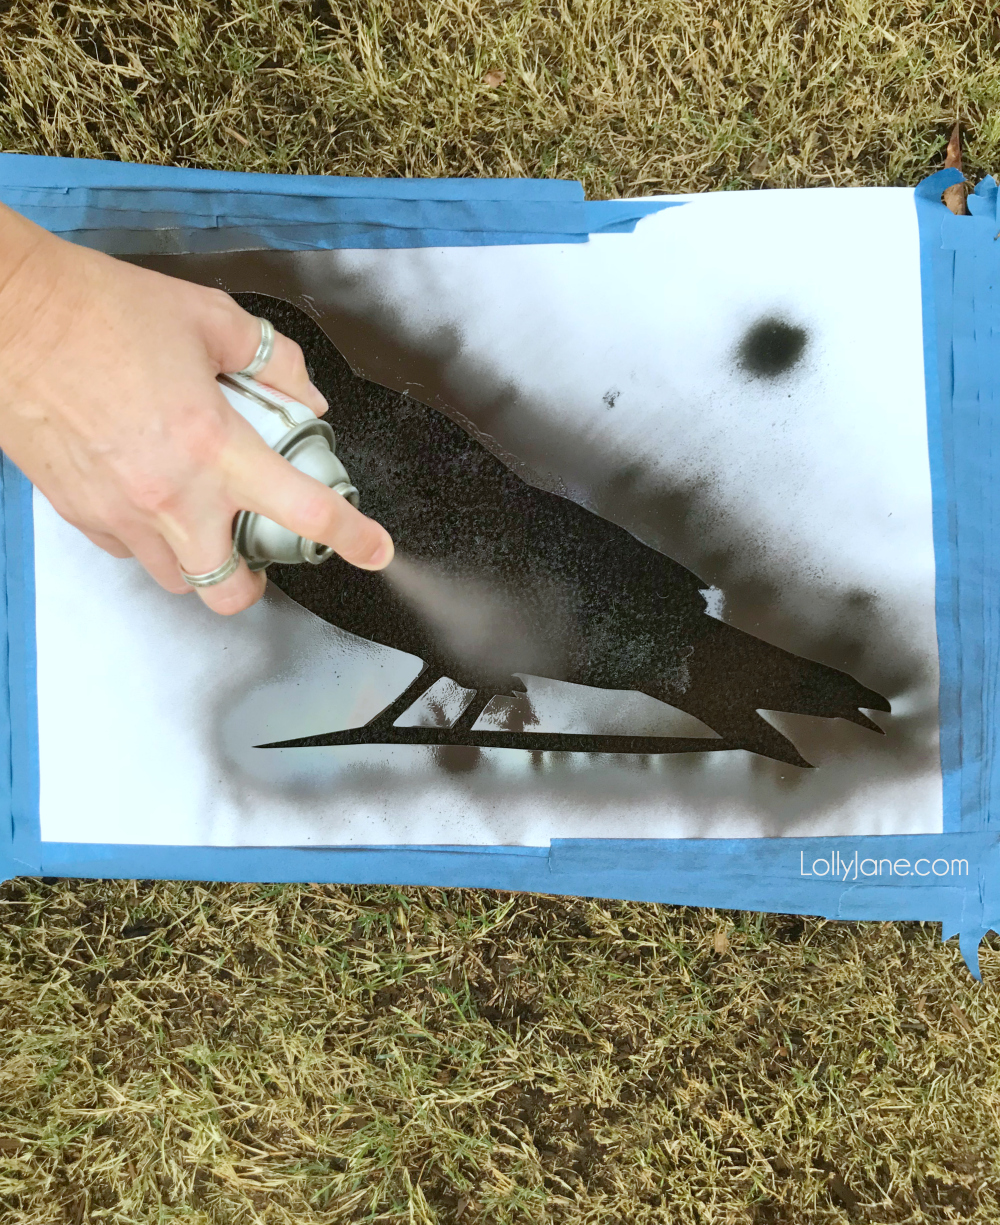 Make this EASY DIY Halloween Crow Doormat for under $15 and in 10 minutes! Click picture for the full tutorial at LollyJane.com! #diy #halloweendecor #diydoormat #halloweendecor #crow #halloweendiy